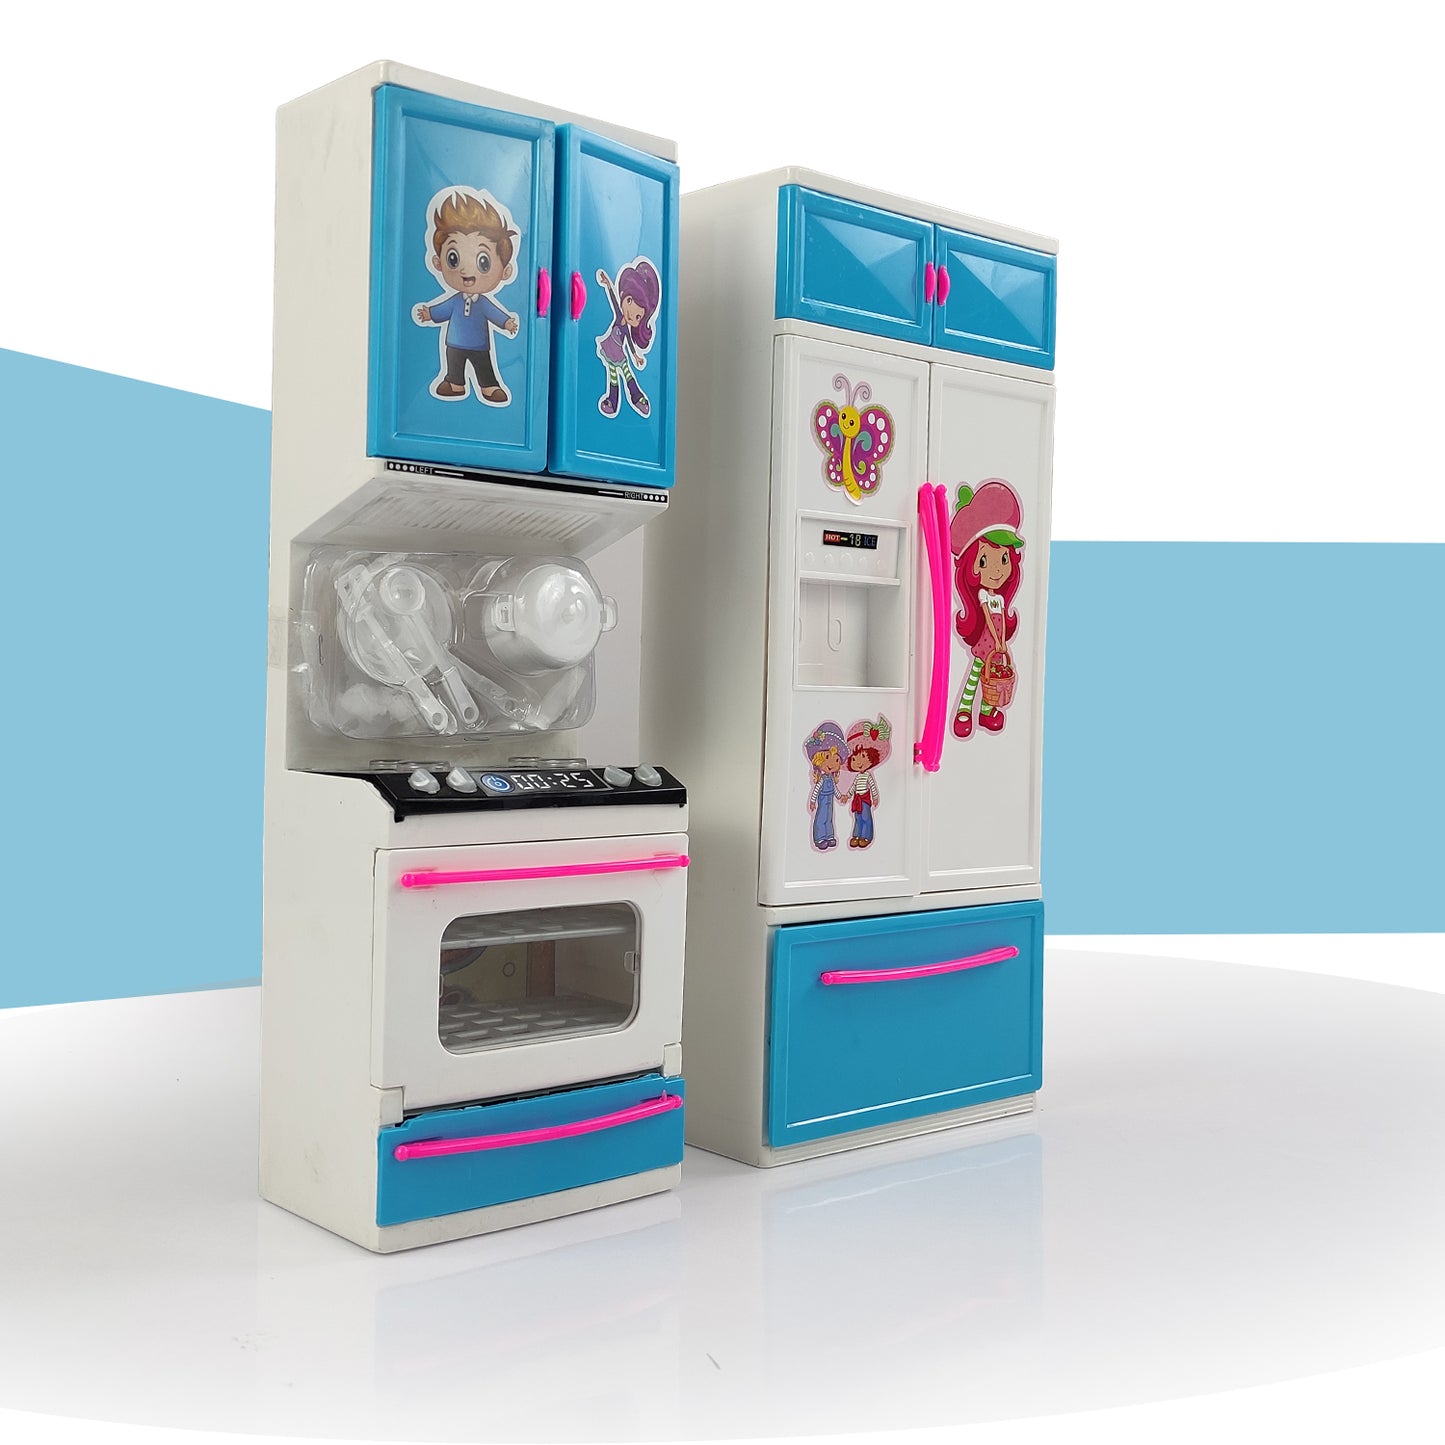 NHR 2-Door Station Kitchen Set with Lights and Music for Kids